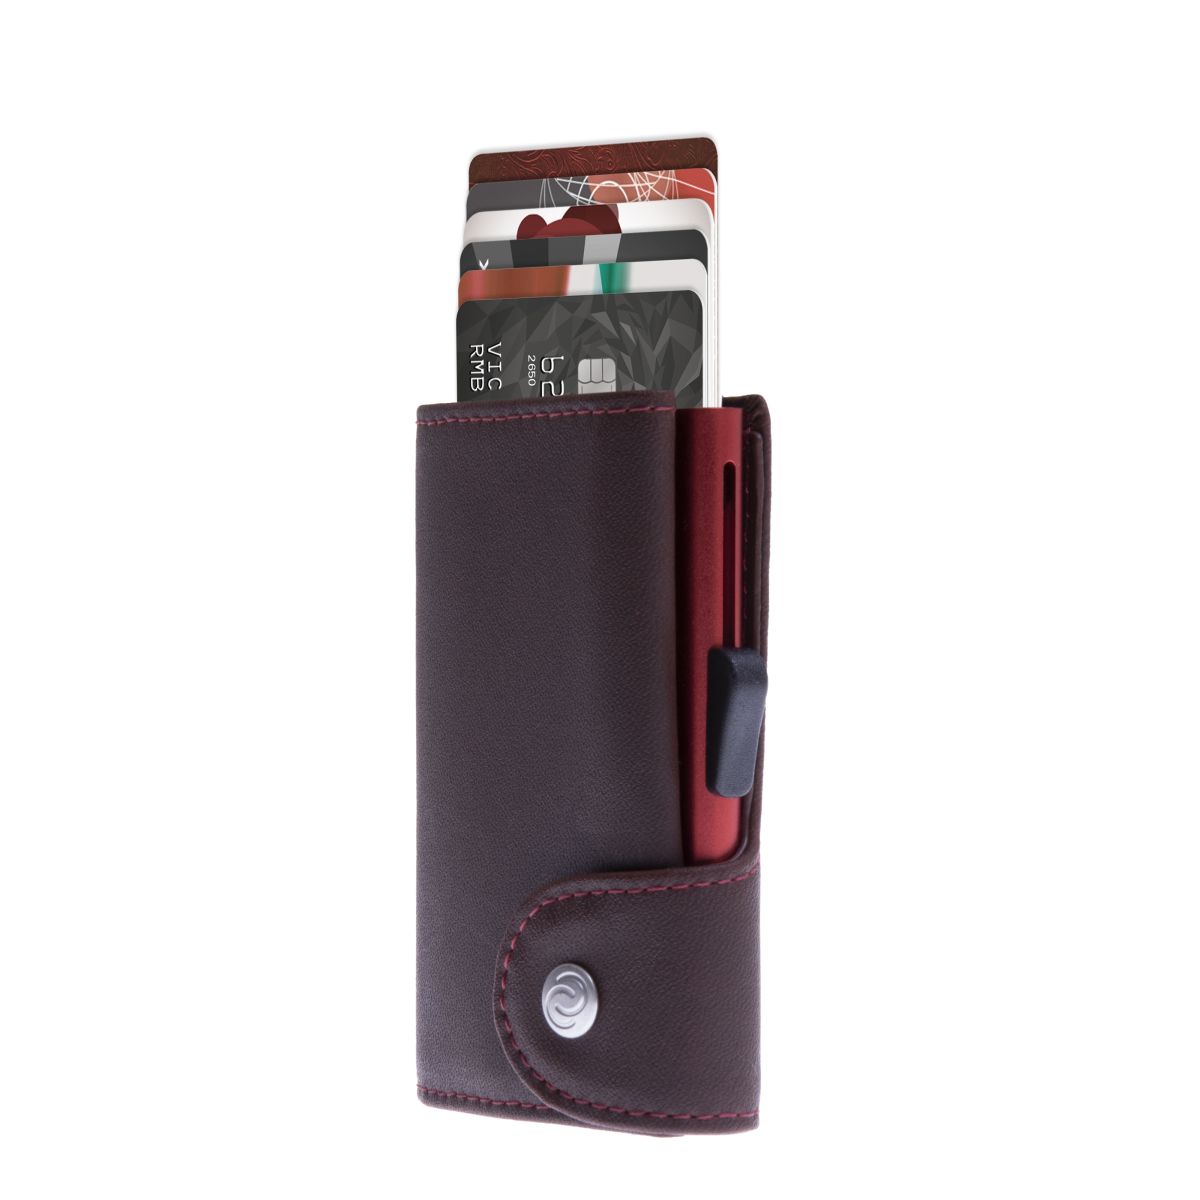 C-Secure Aluminum Card Holder with Genuine Leather and Coin Pouch - Auburn Brown